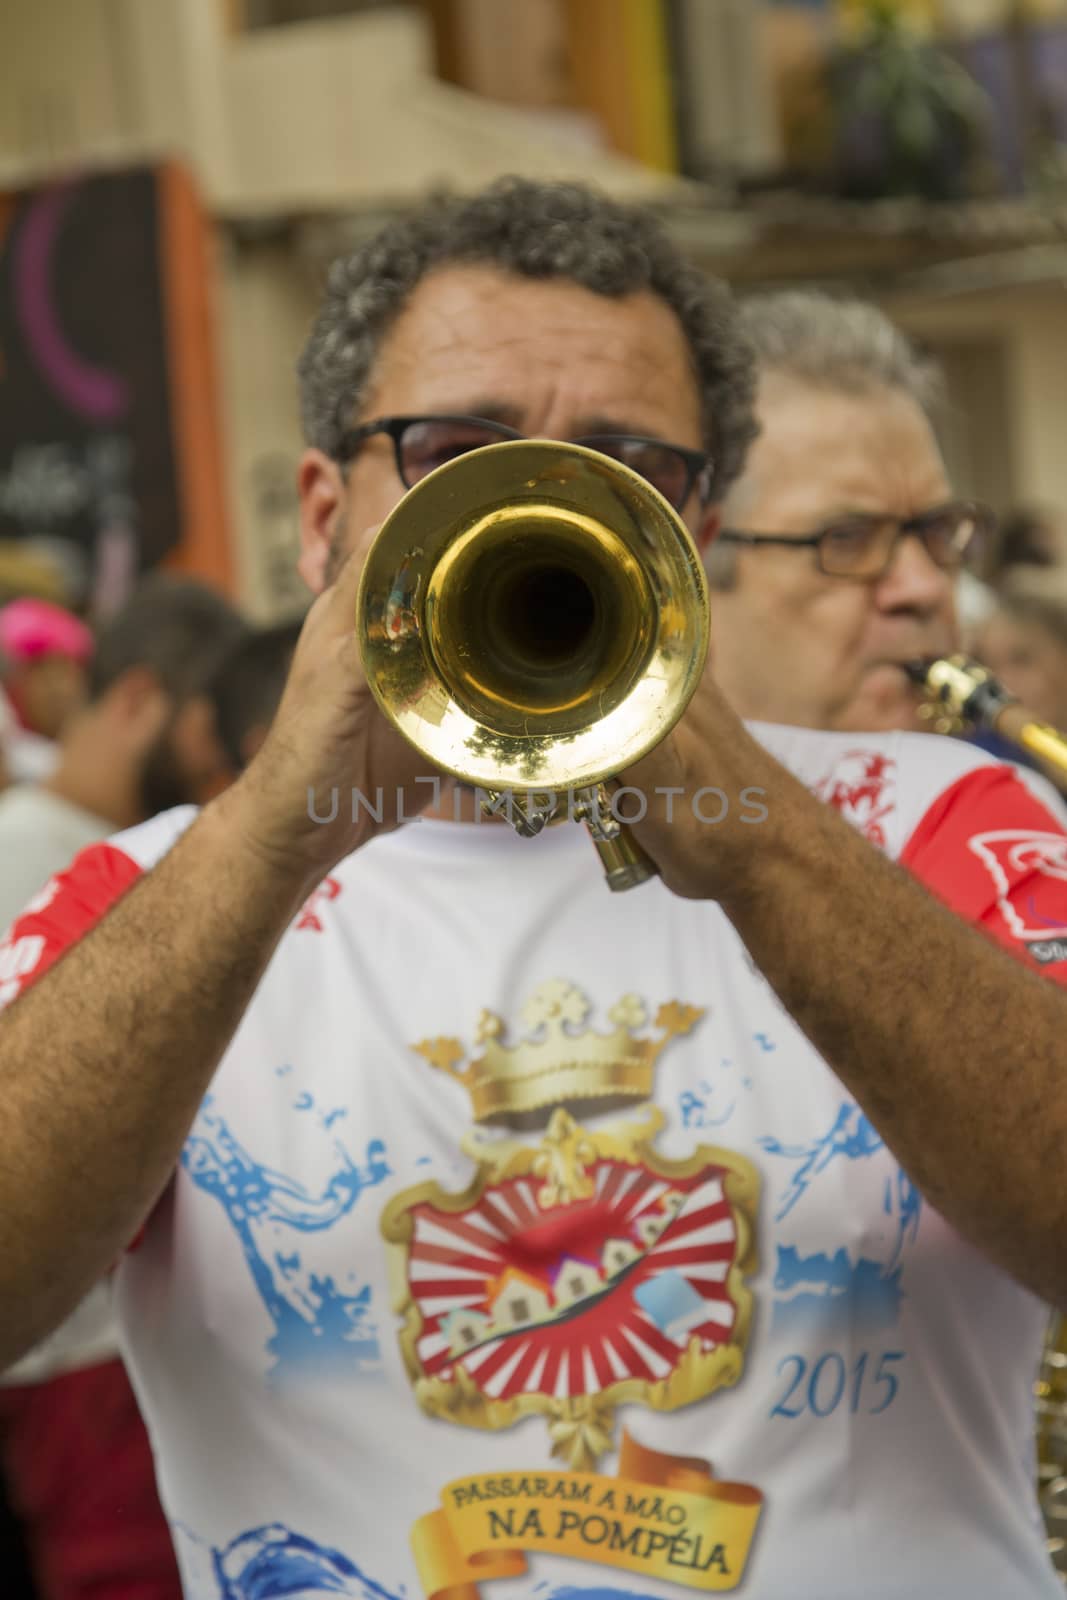 SAO PAULO, BRAZIL - JANUARY 31, 2015: An unidentified man playing trumpet in a traditional samba band participate in the annual Brazilian street carnival.